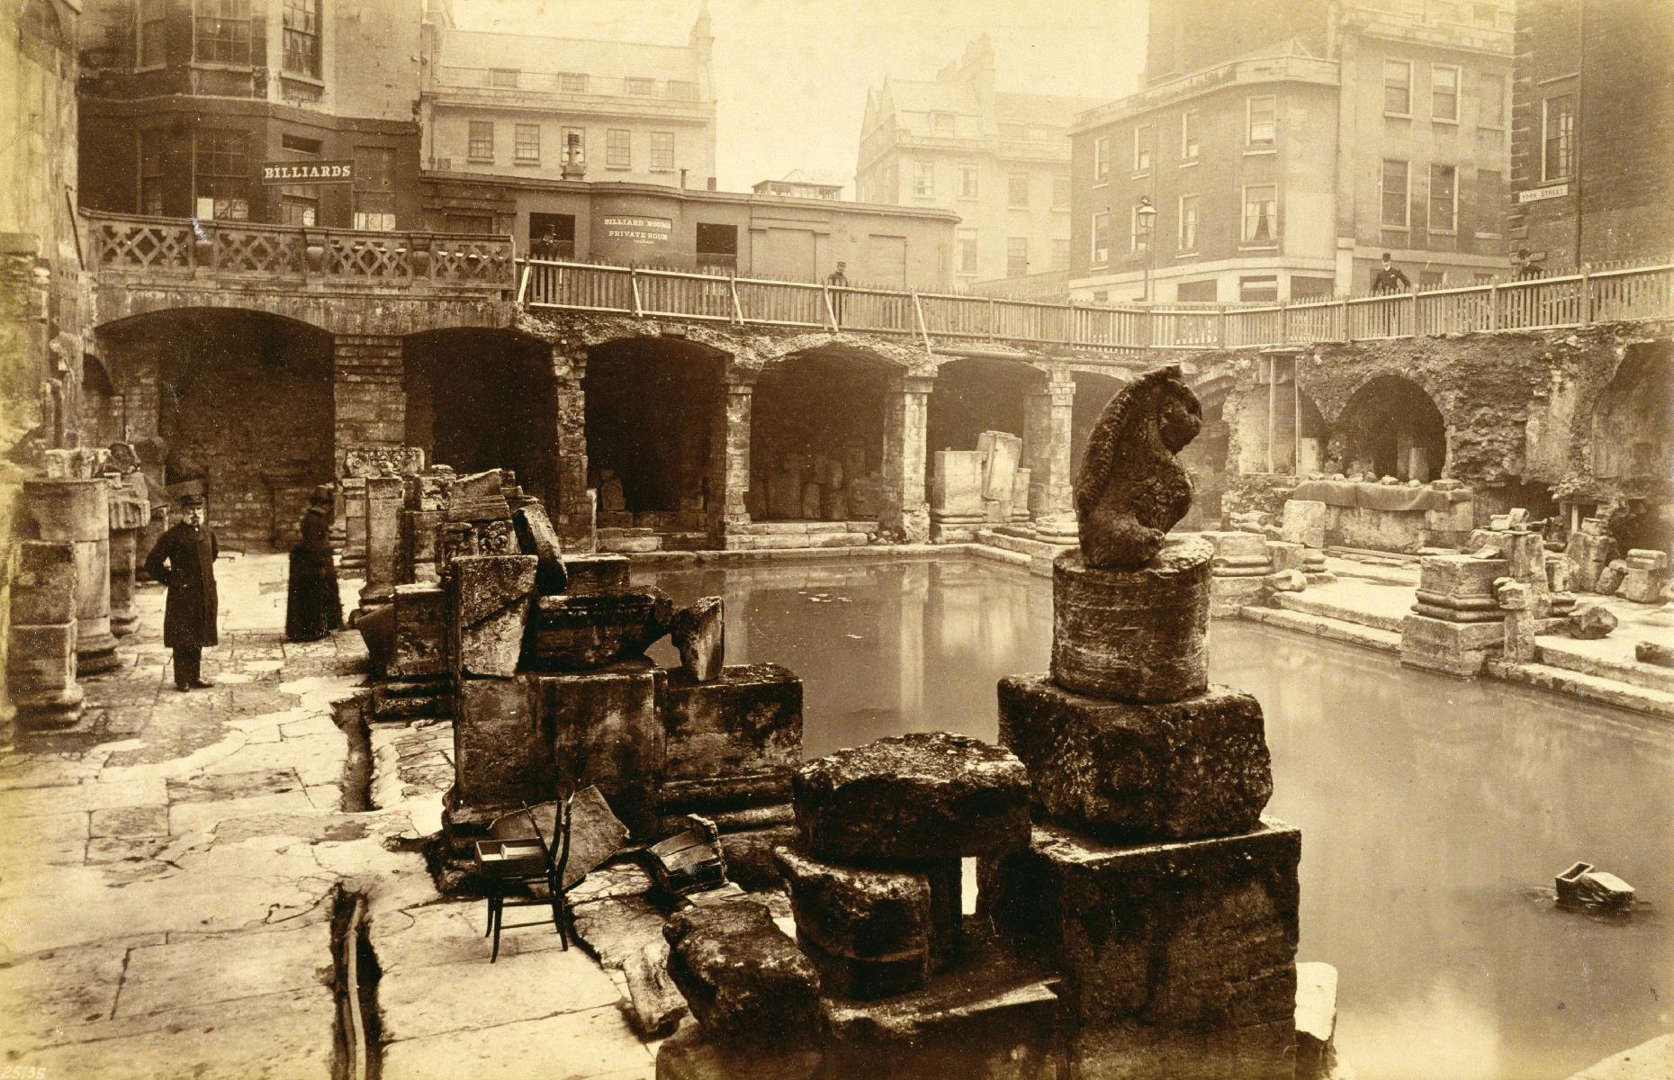 Slide 16 of 41: The Romans revered the hot springs that bubble in the ancient city of Bath. Convinced of the water's healing properties, they built an extravagant bathhouse and a temple devoted to goddess Sulis Minerva. But after Roman rule ended in Britain, the baths fell into disuse and disrepair. The site was rediscovered in the 1880s and large parts of the Great Bath were uncovered and eventually opened to the public in 1897. Tourists look across the ruins of the Great Bath in this photo taken in the late 19th century.